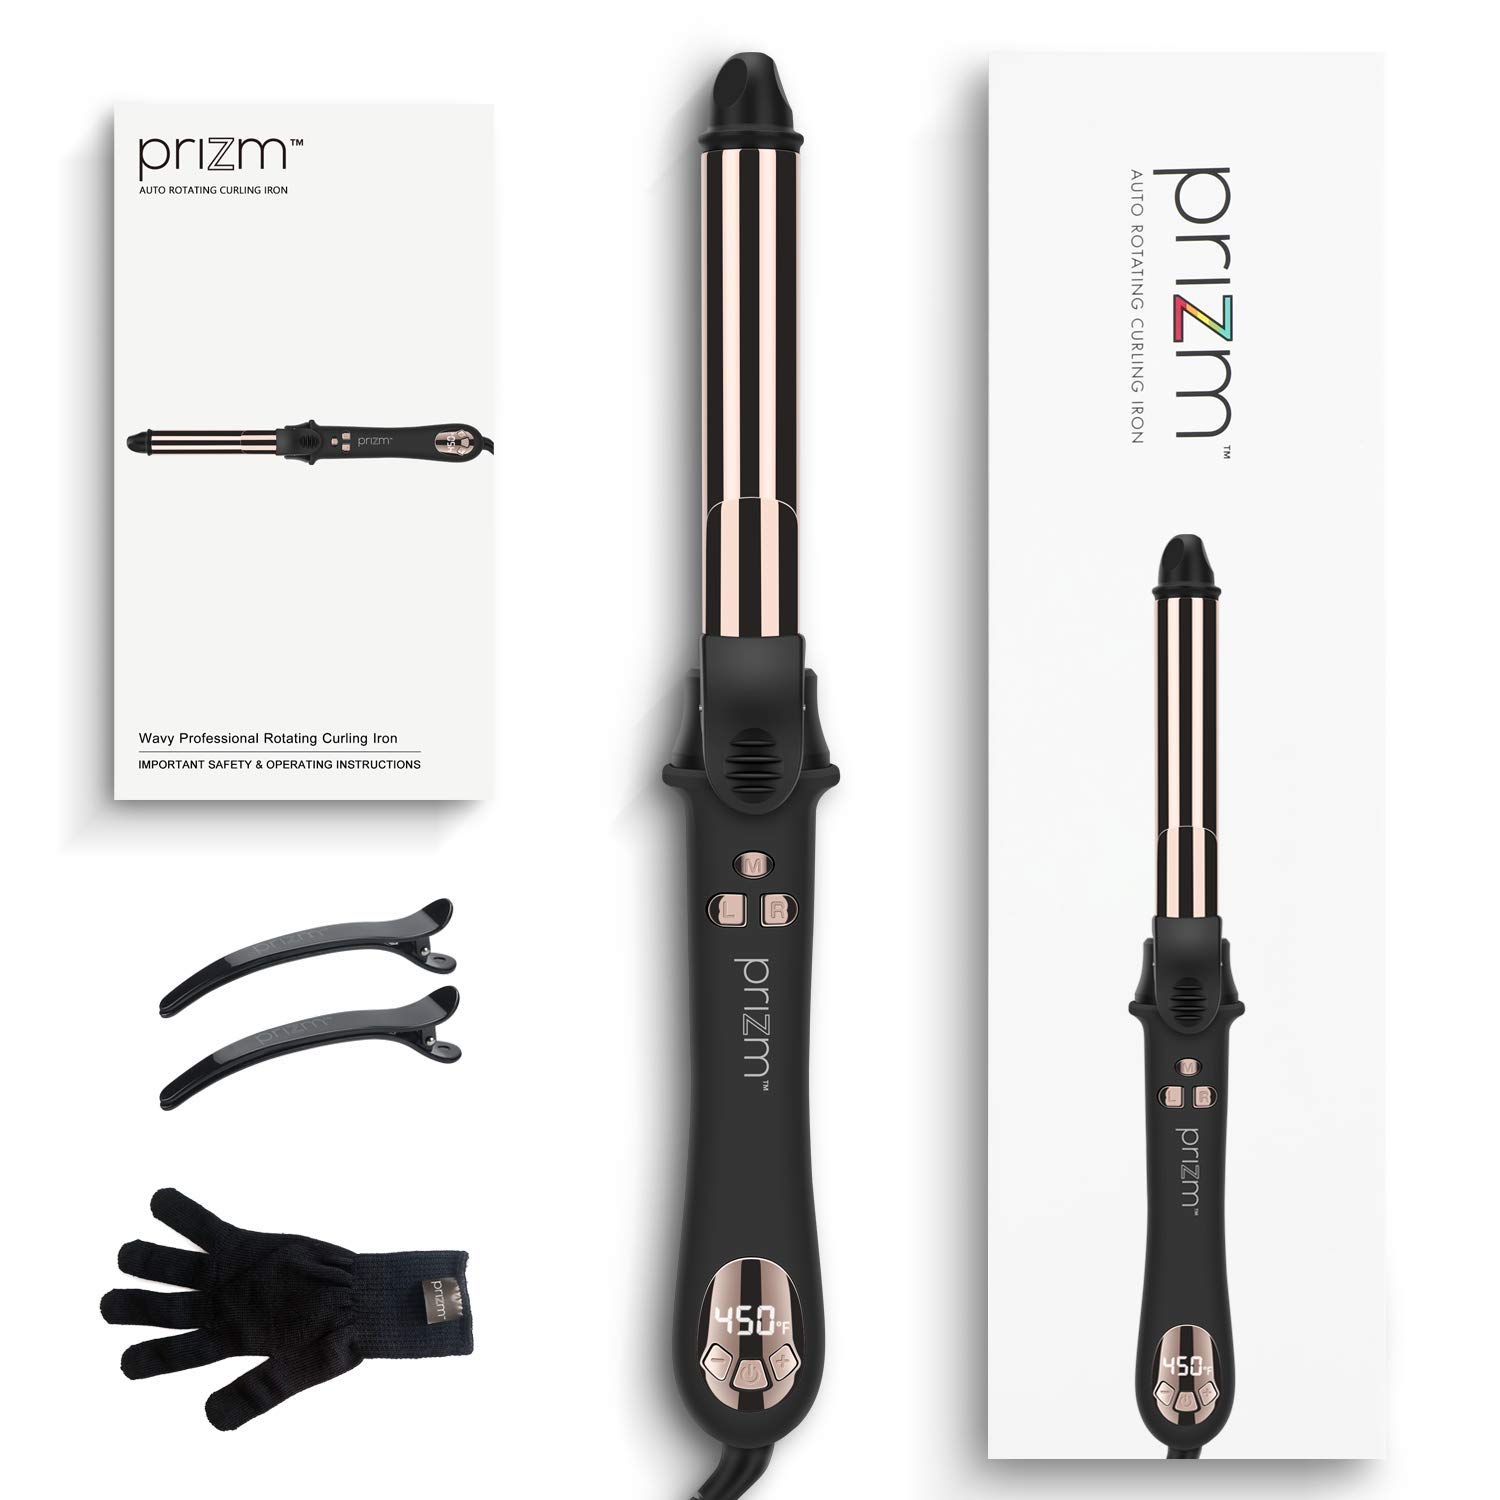 Prizm 1 Inch Wavy Professional Rotating Curling Iron, [...]